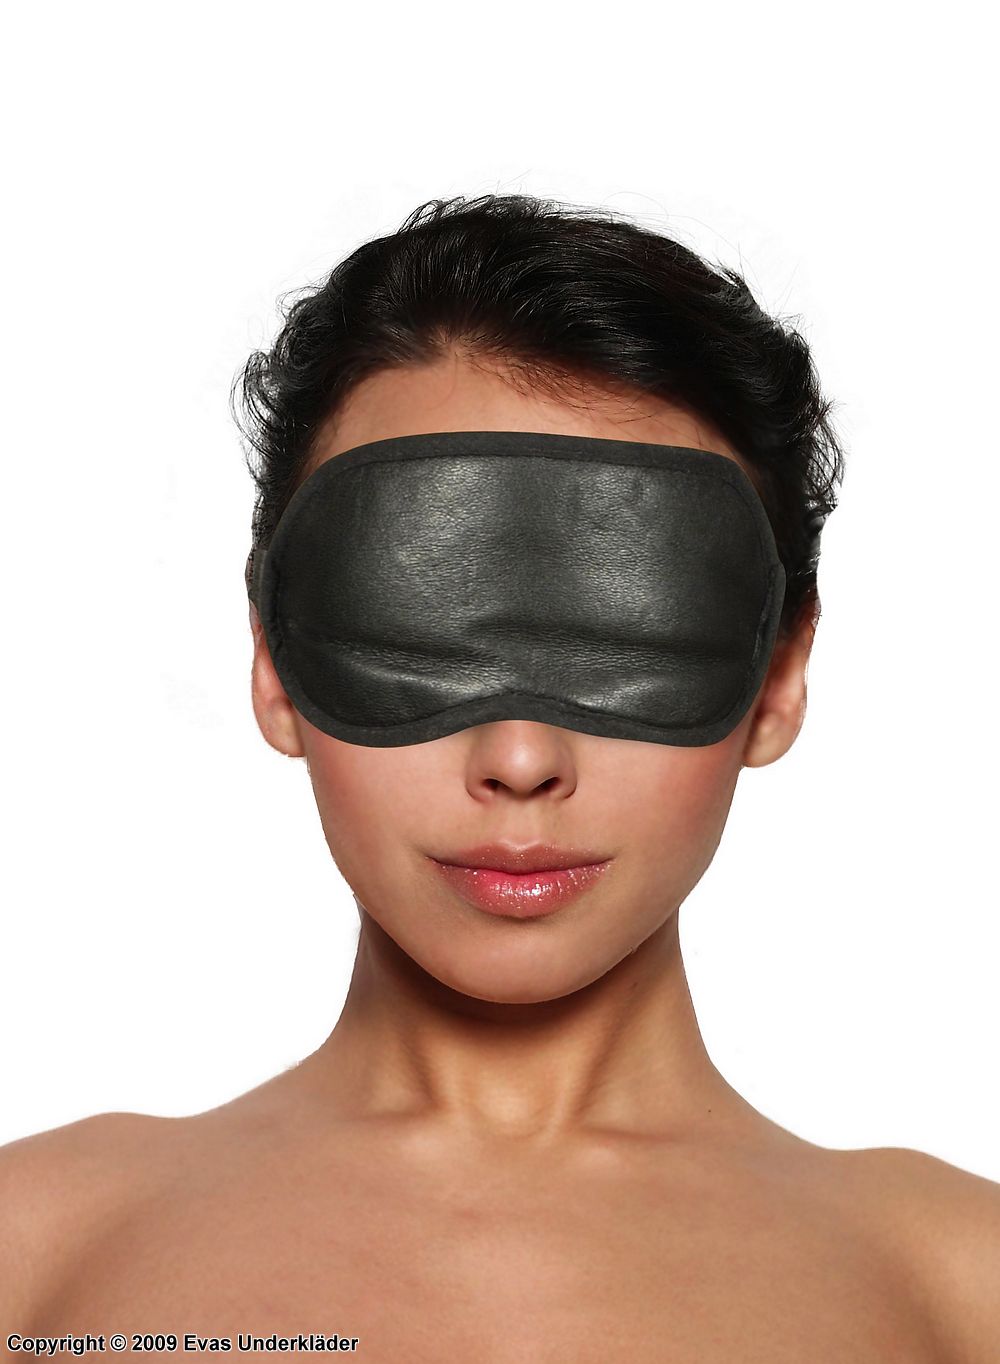 Sleep mask in handcrafted leather and fur